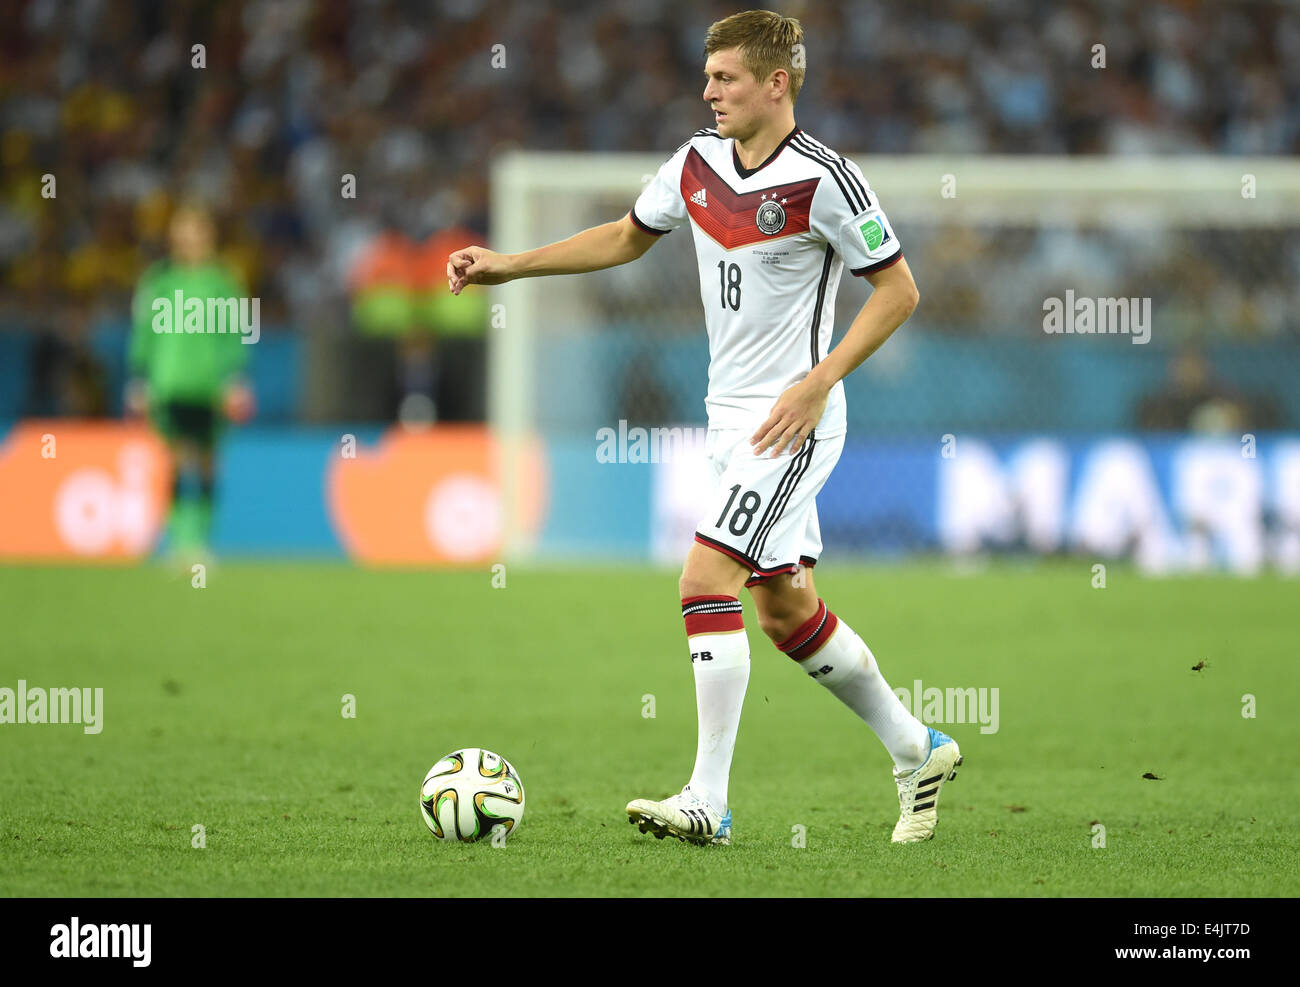 Rio de Janeiro, Brazil. 13th July, 2014. Toni Kroos of Germany in action during the FIFA World Cup 2014 final soccer match between Germany and Argentina at the Estadio do Maracana in Rio de Janeiro, Brazil, 13 July 2014. Photo: Andreas Gebert/dpa/Alamy Live News Stock Photo